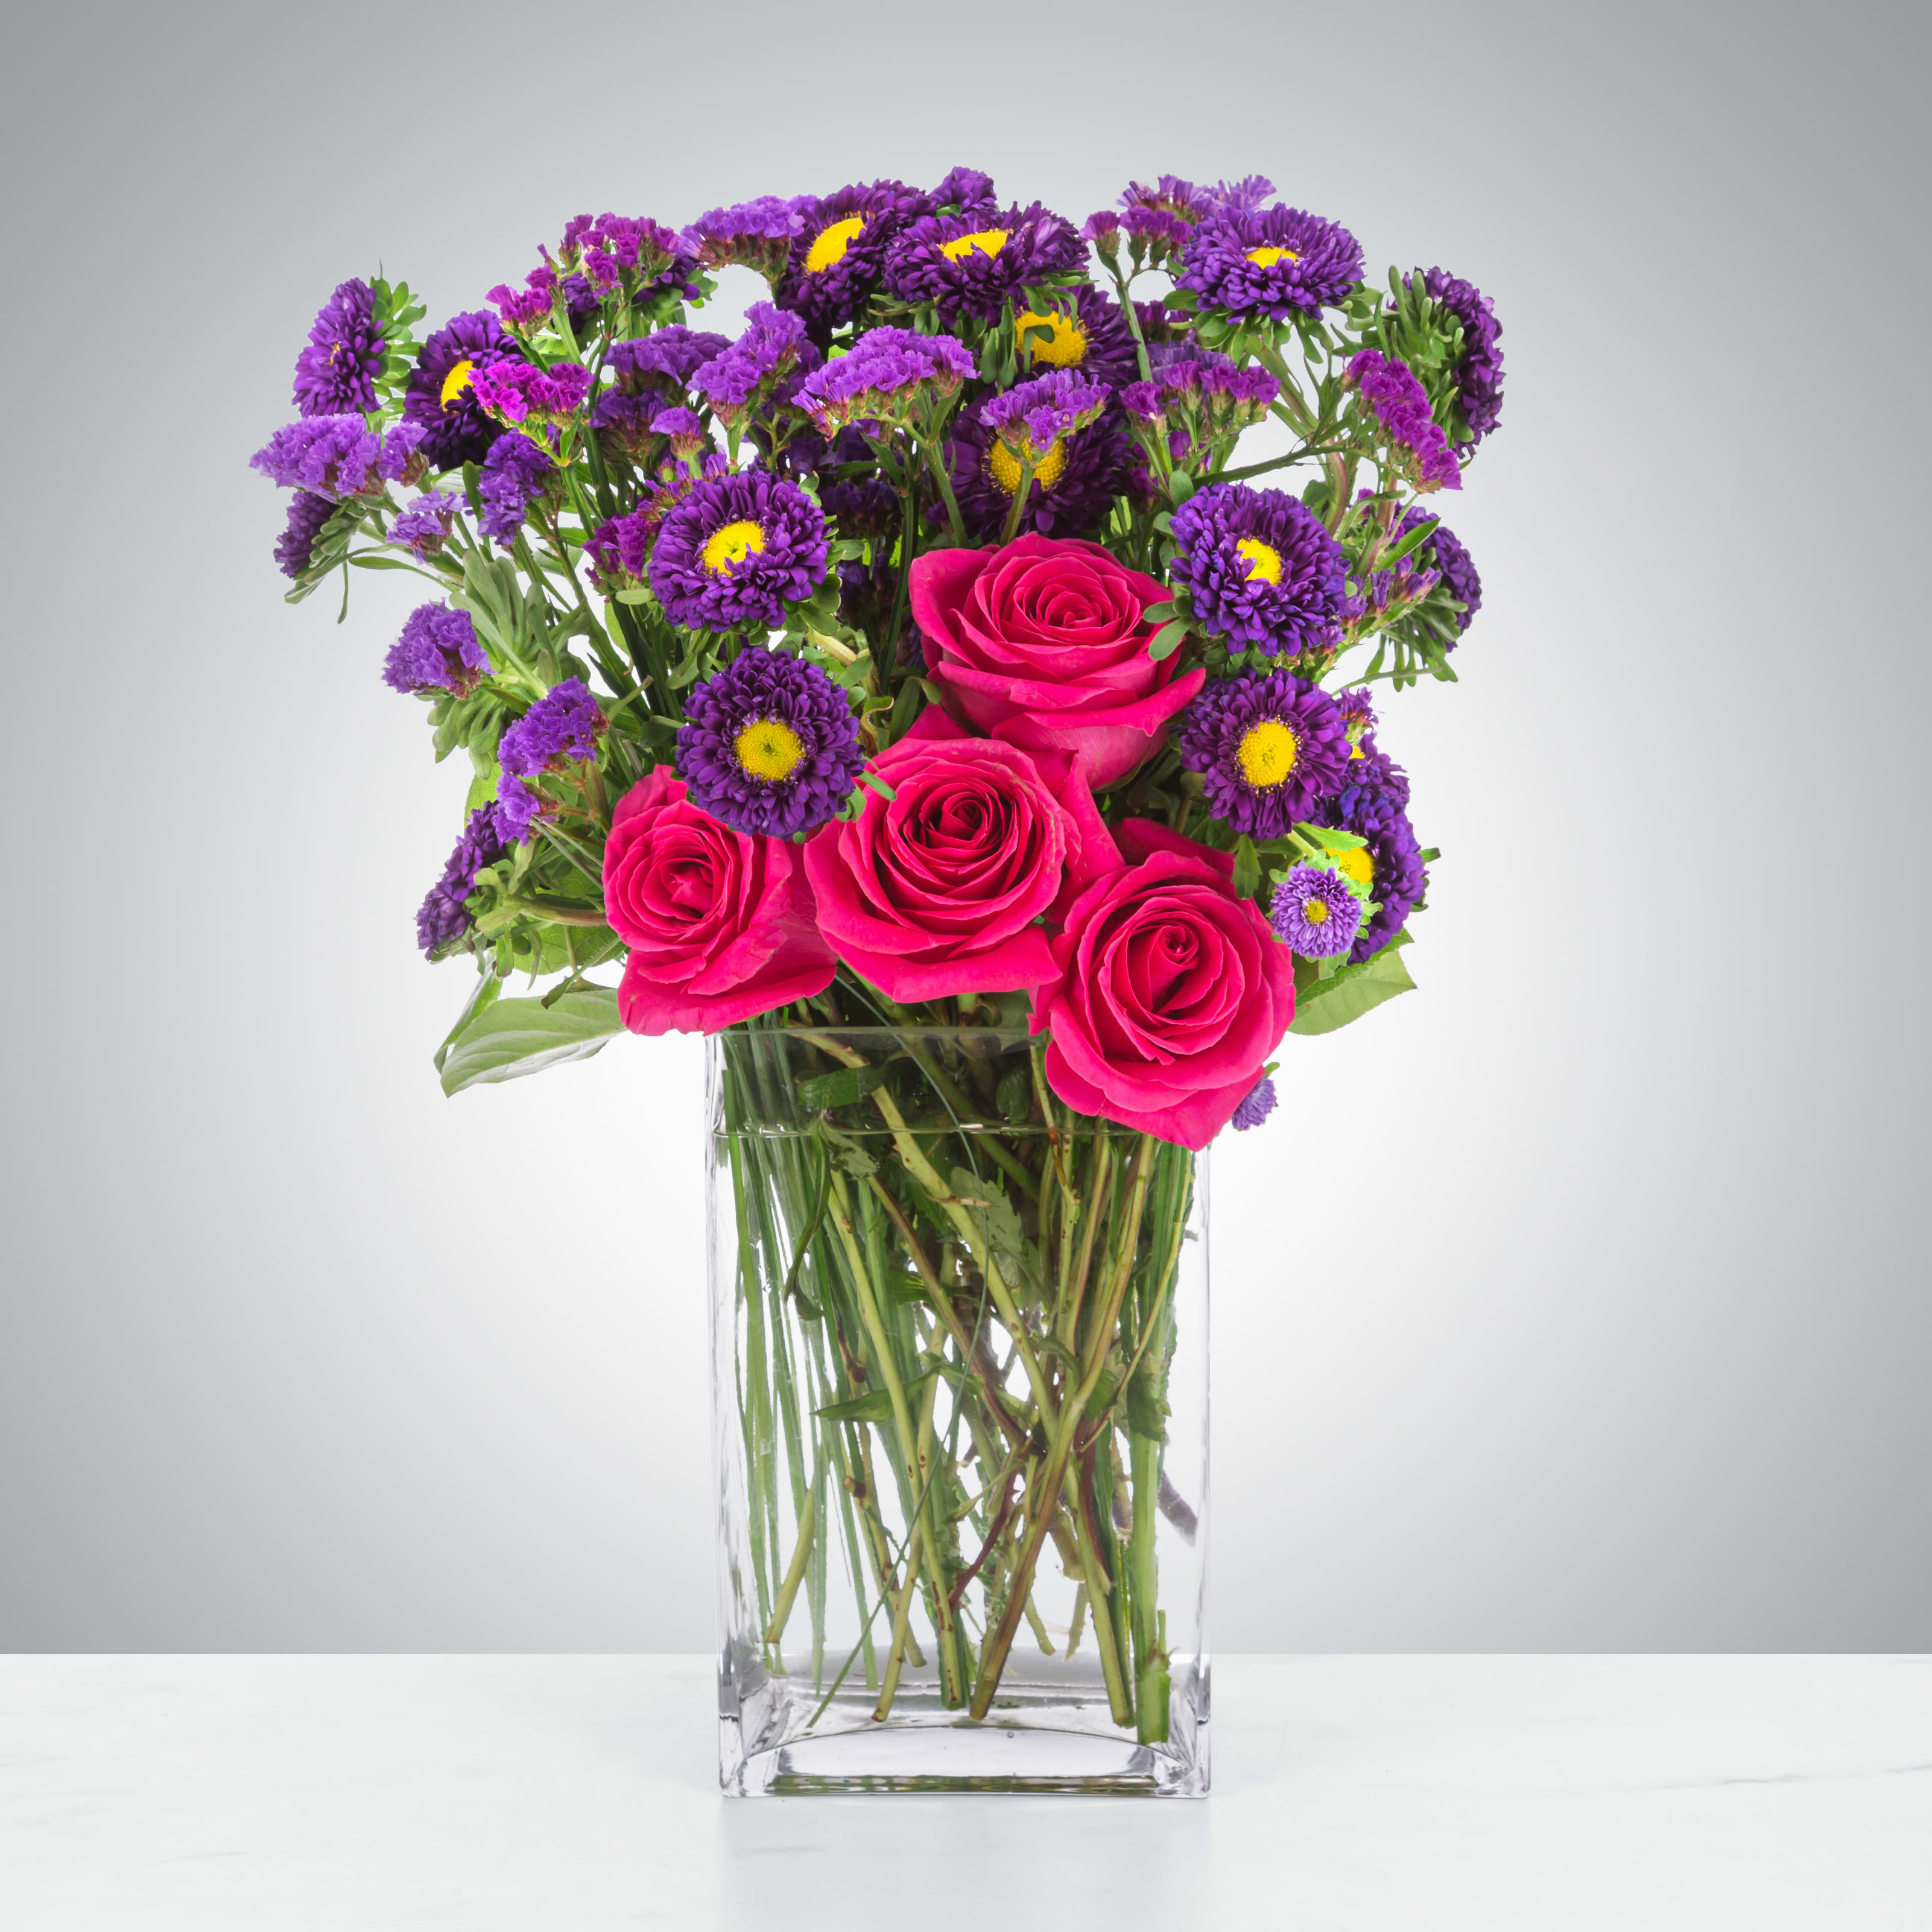 Twilight Glow by BloomNation™ - This pink and purple arrangement is tough! Purple Matsumoto asters, purple statice, and hot pink roses are all sturdy flowers and will provide your recipient with a fresh-looking arrangement for a long time. A good option to send for celebrating a birthday, a graduation or just because.  Approximate Dimensions: 14&quot;D x 18&quot;H